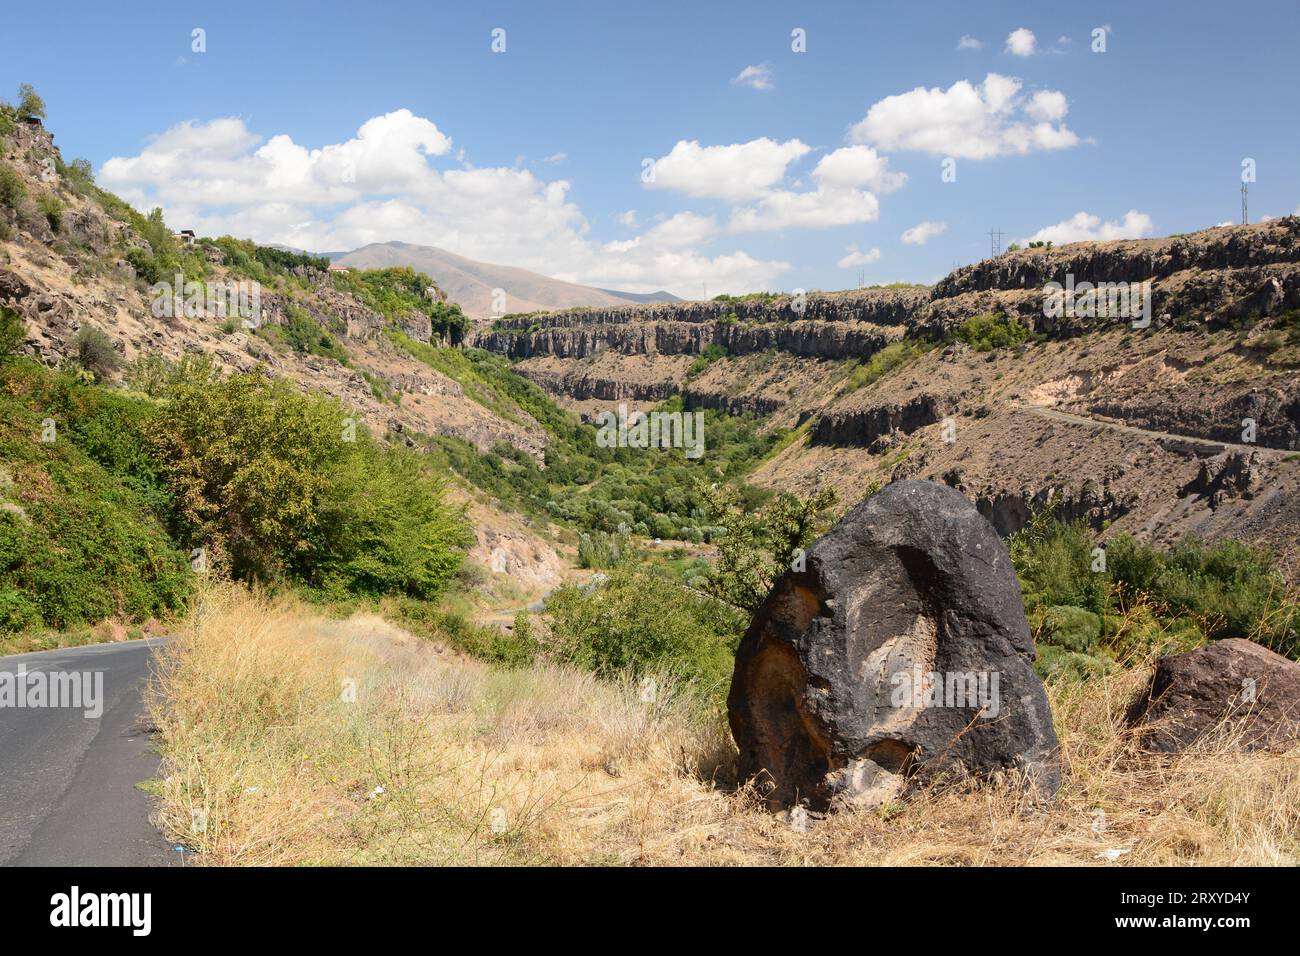 The Kasagh river canyon. View from Mughni. Aragatsotn province. Armenia Stock Photo